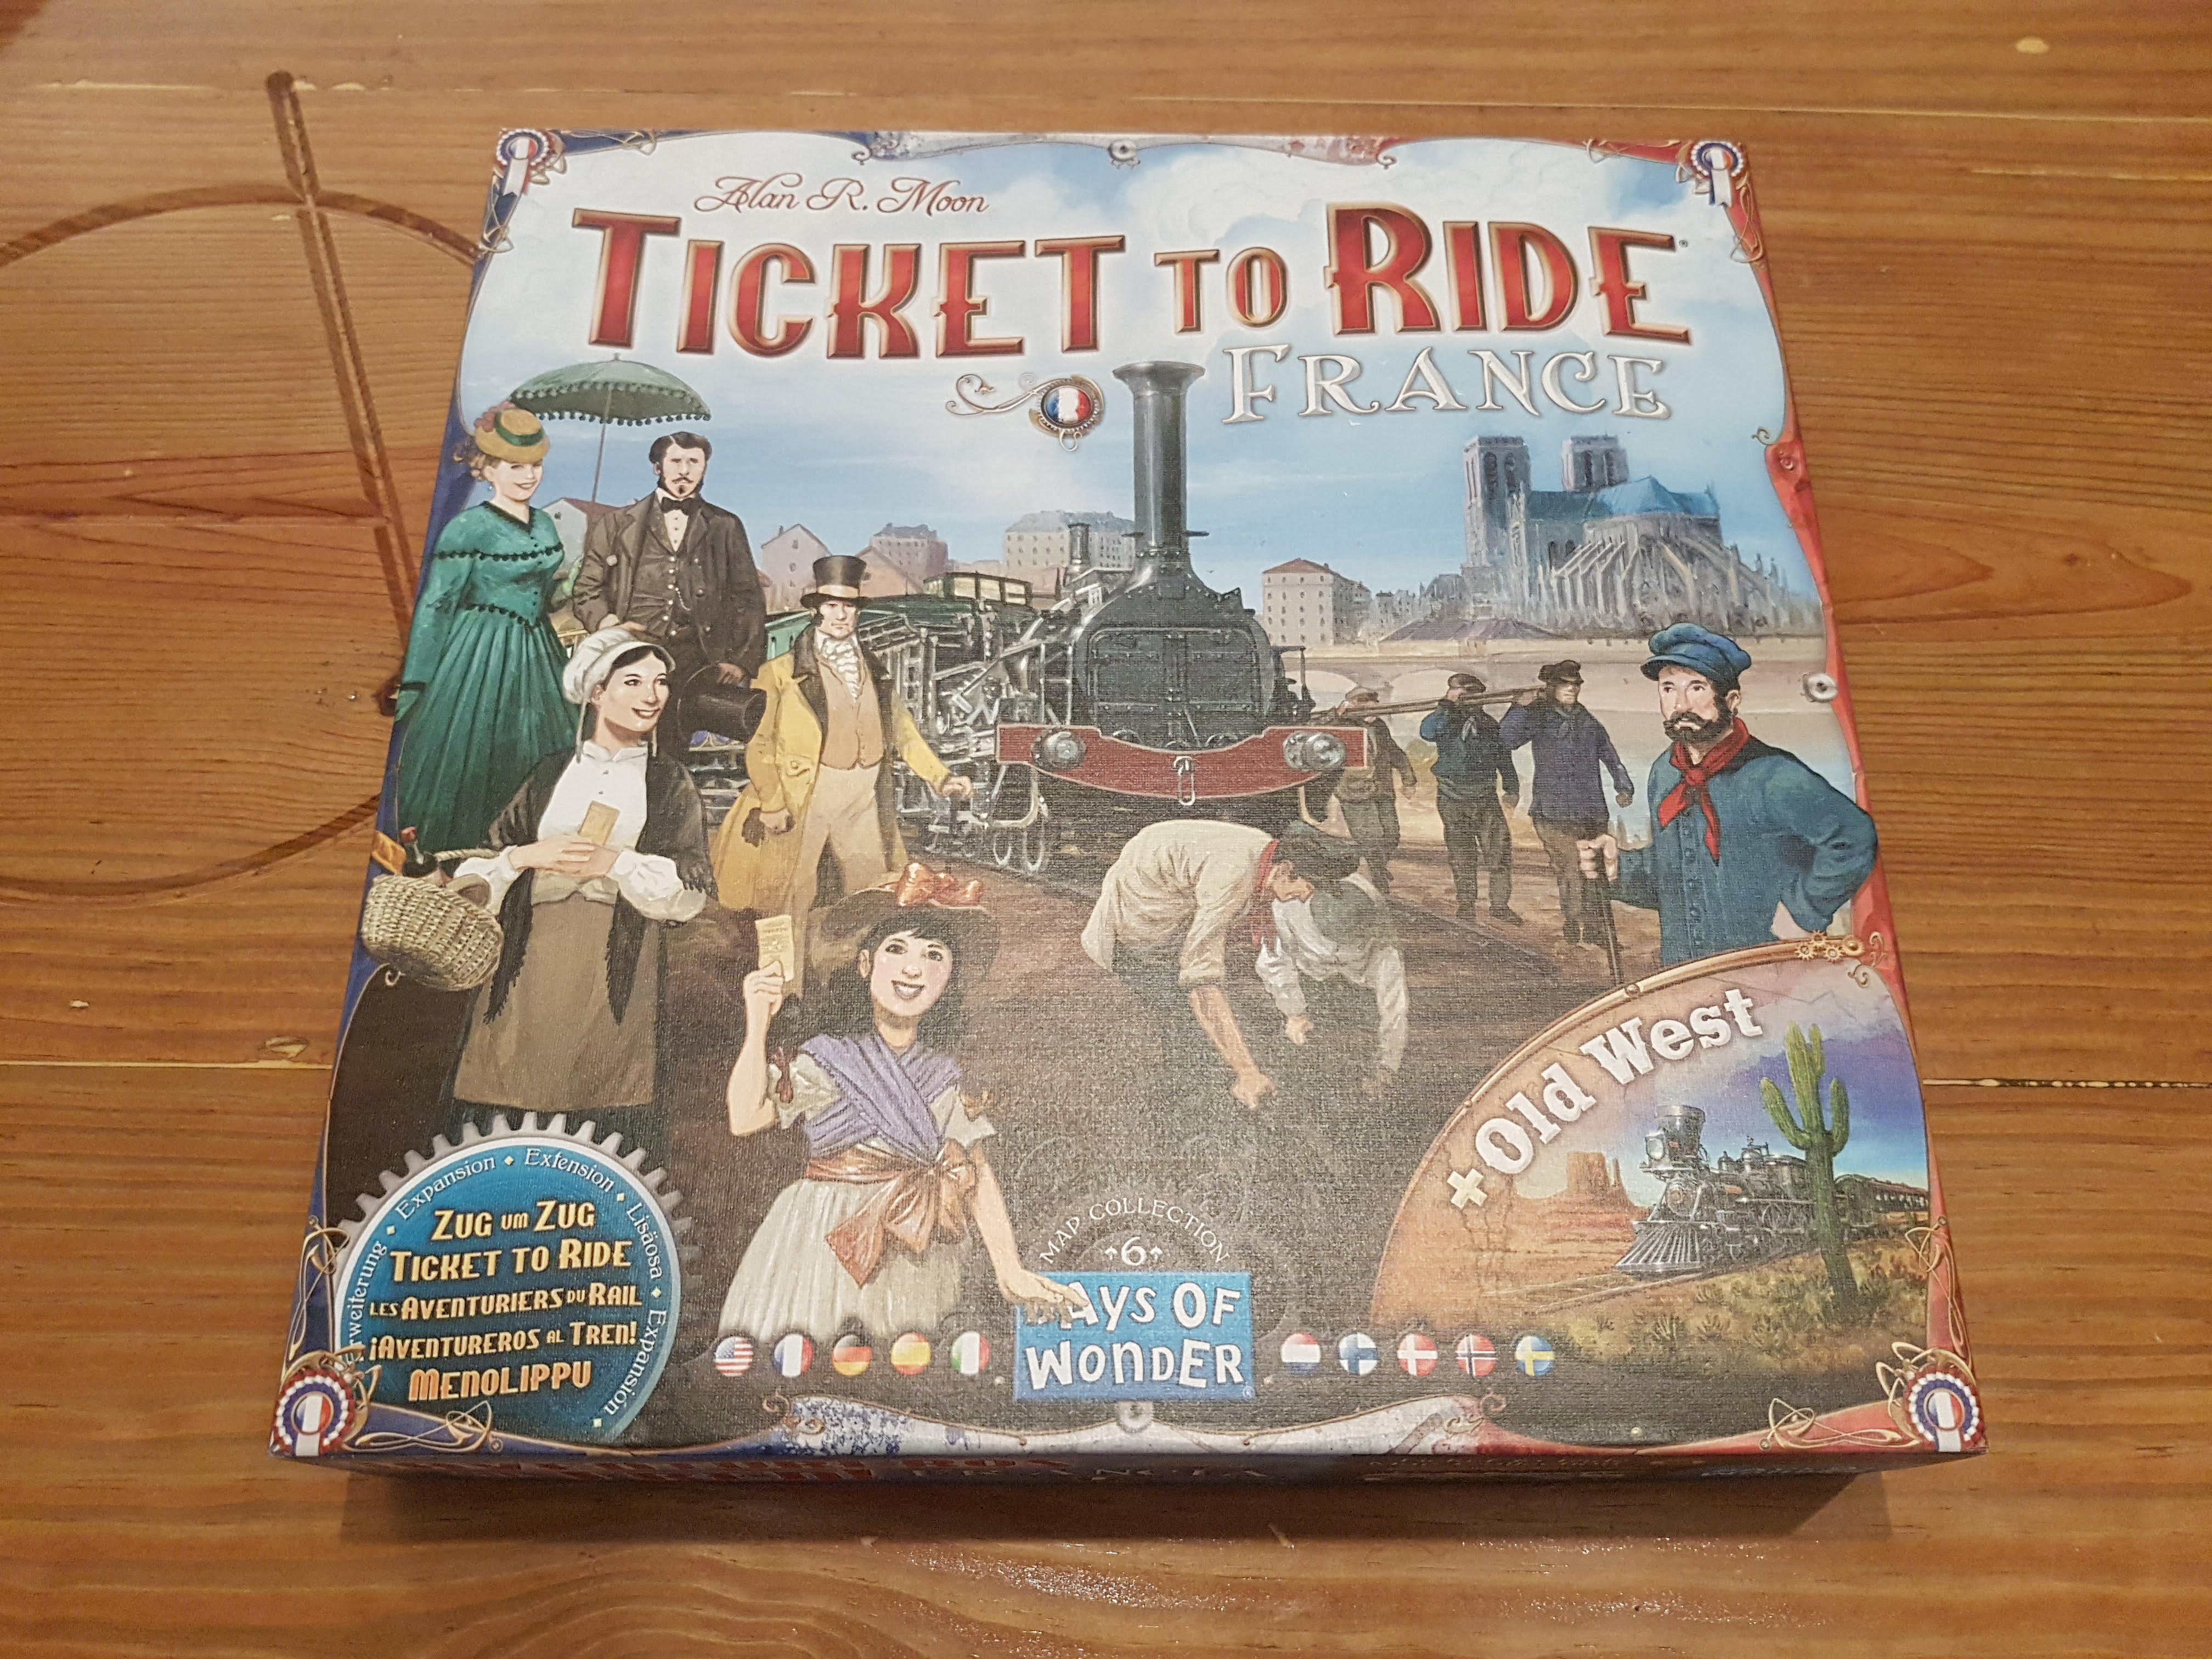 Ticket To Ride France Review – Maps of Wonders